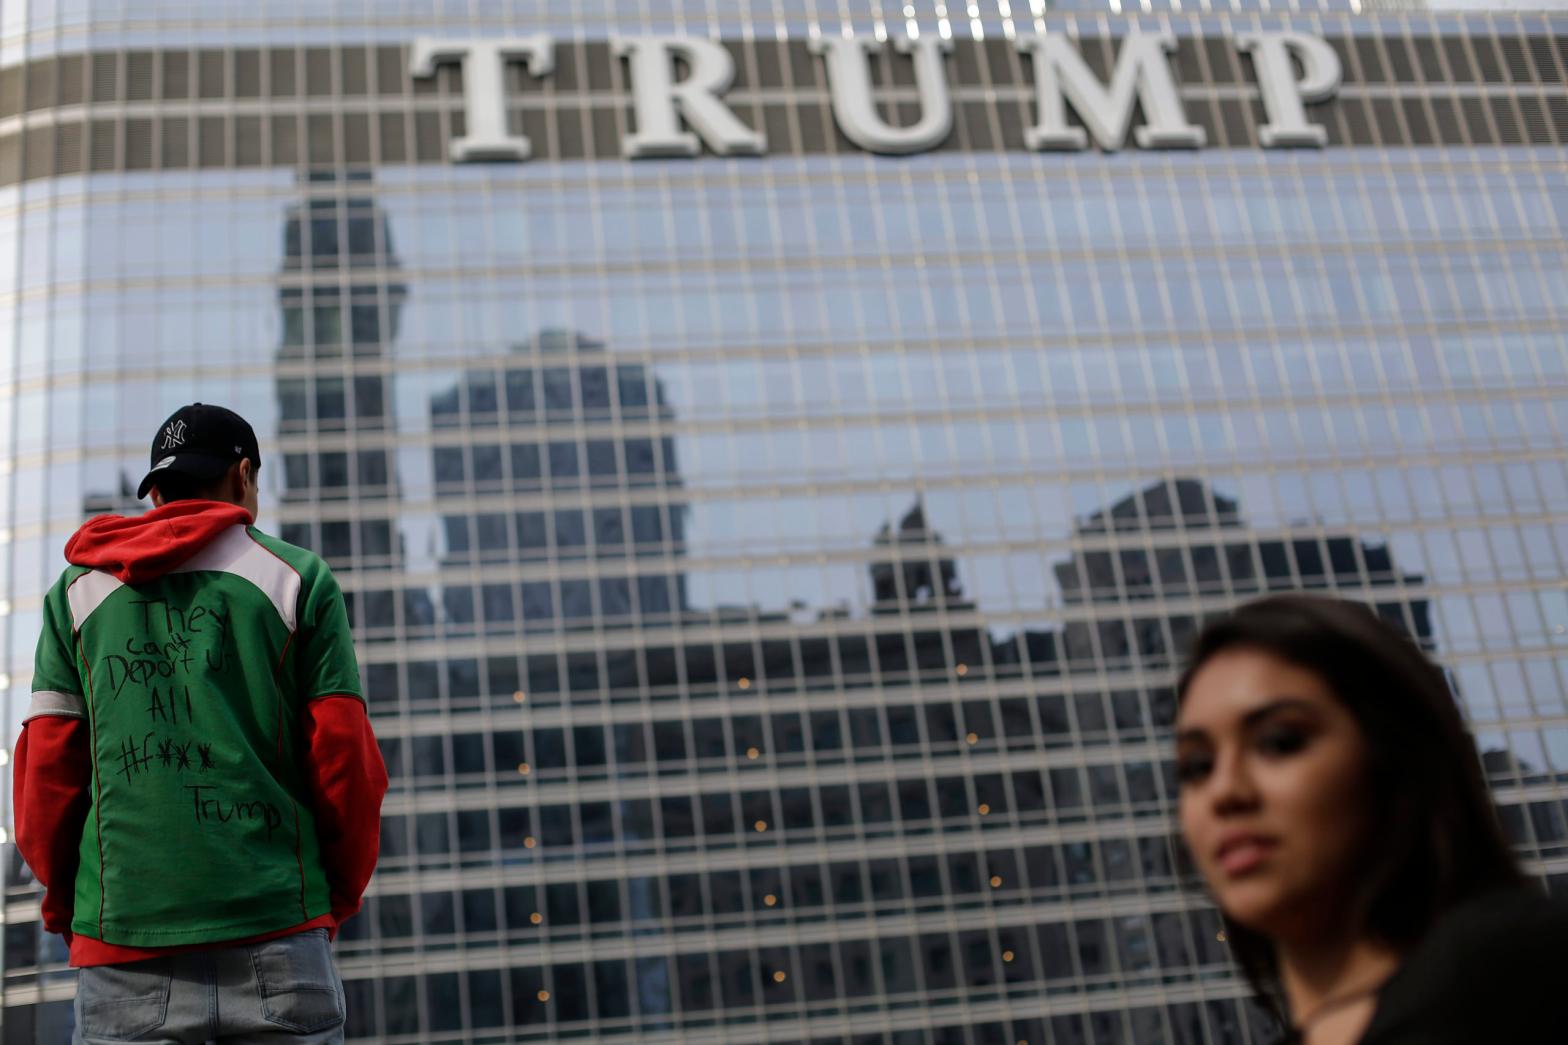 The Trump International Hotel and Tower in Chicago, Illinois.  (Photo: JOSHUA LOTT, Getty Images)